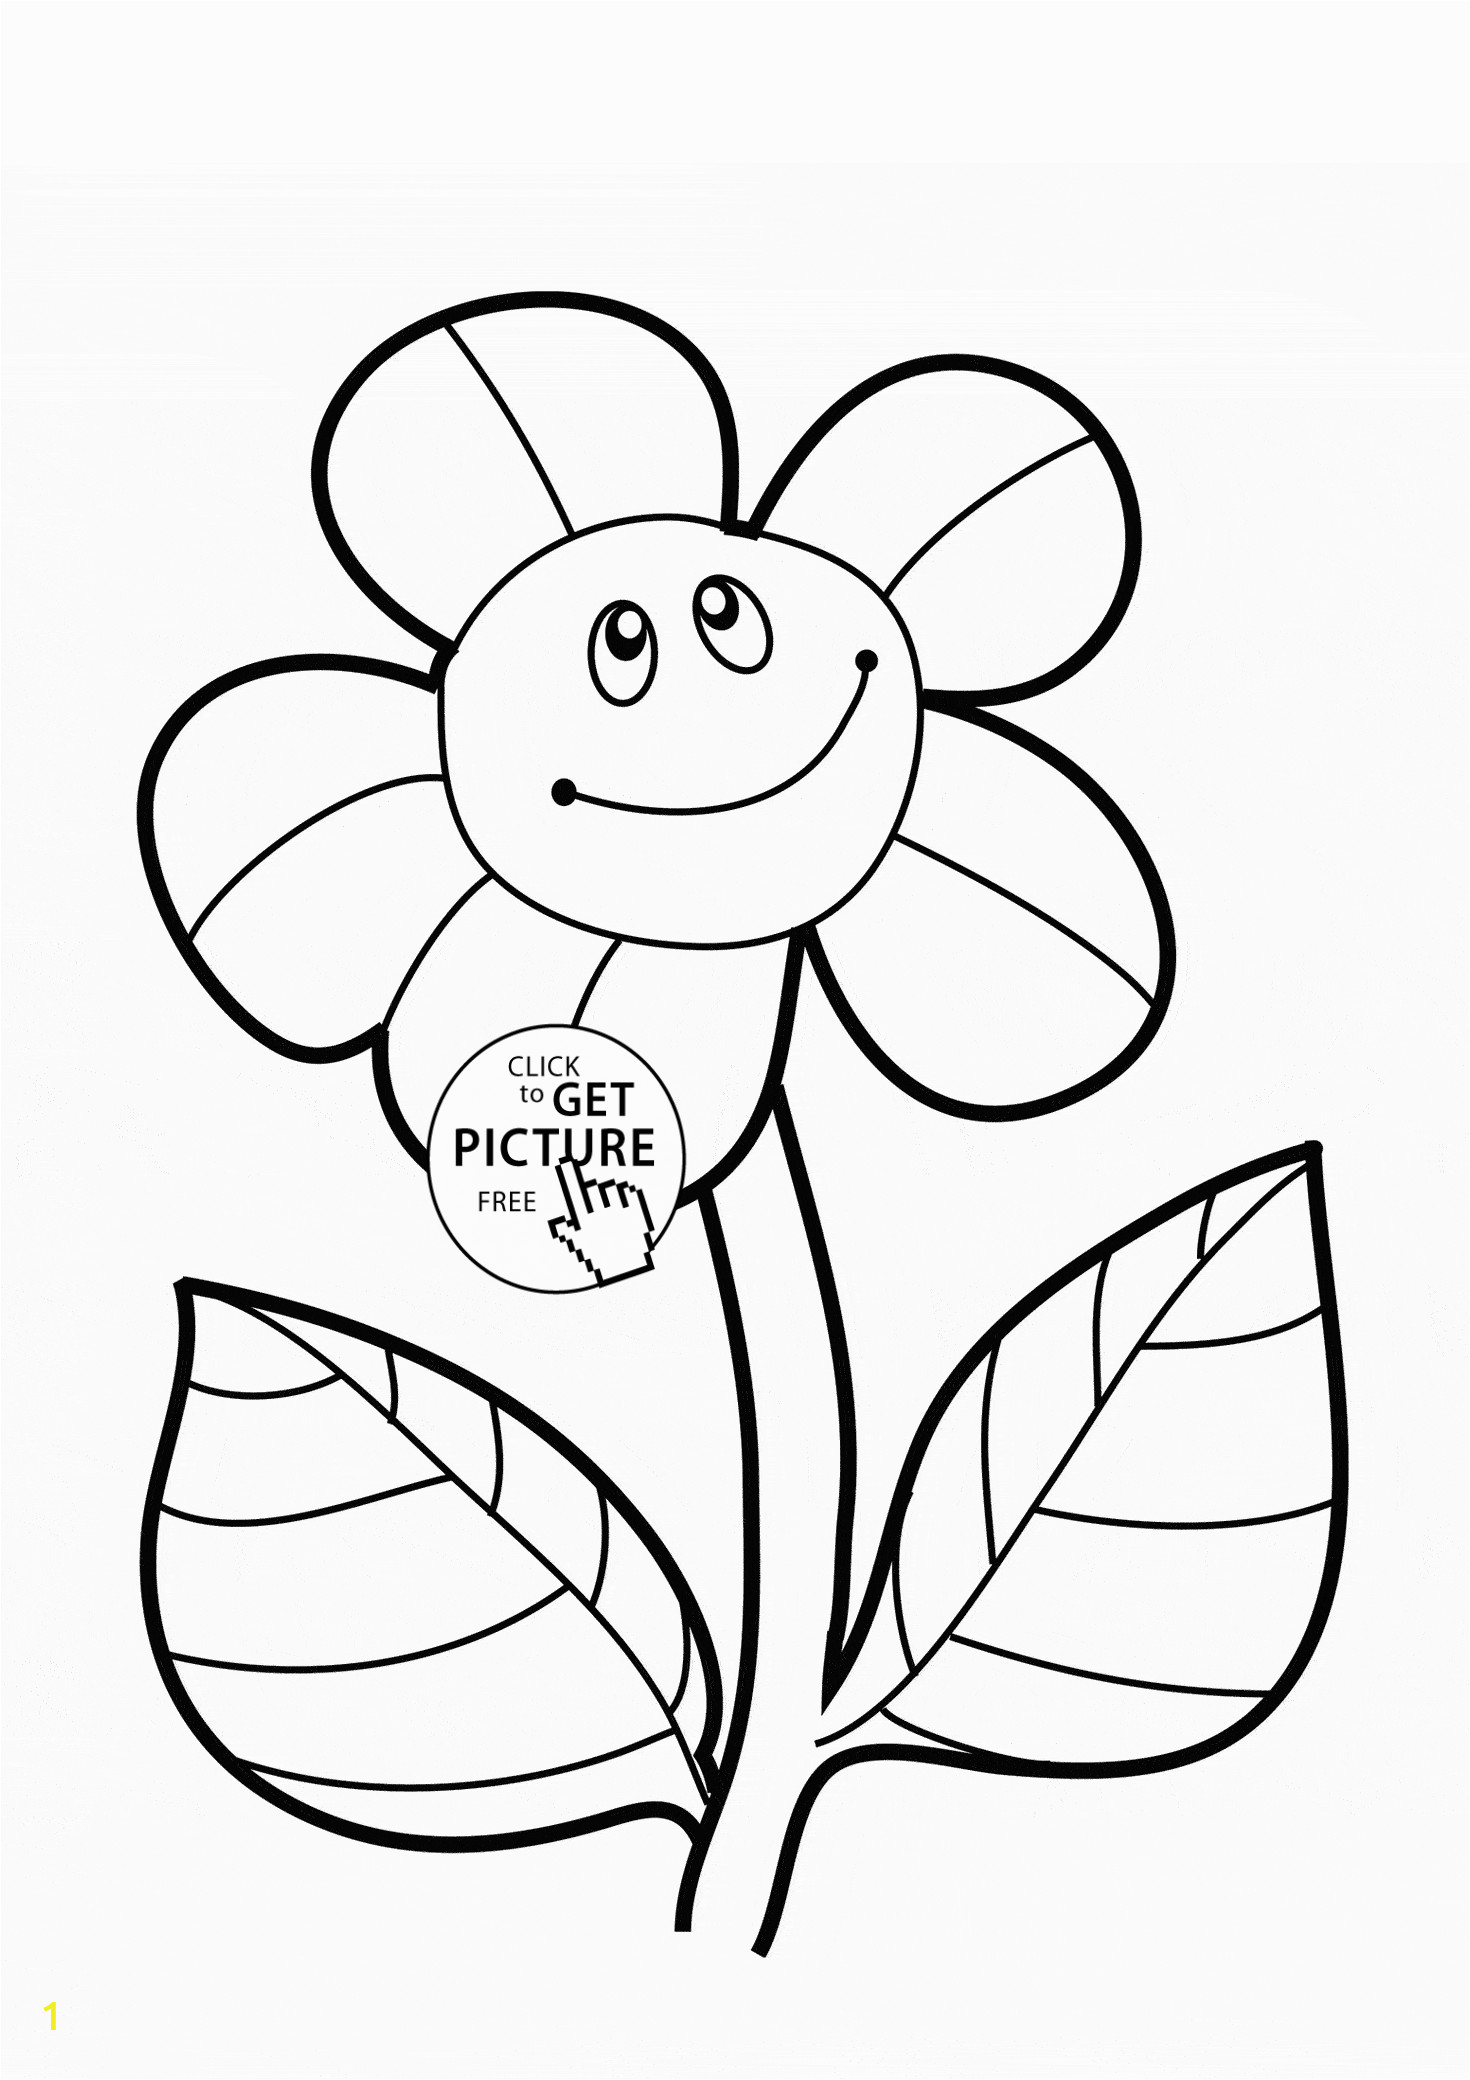 Printable Flower Coloring Pages for Kids Sunflower Drawing Simple at Getdrawings